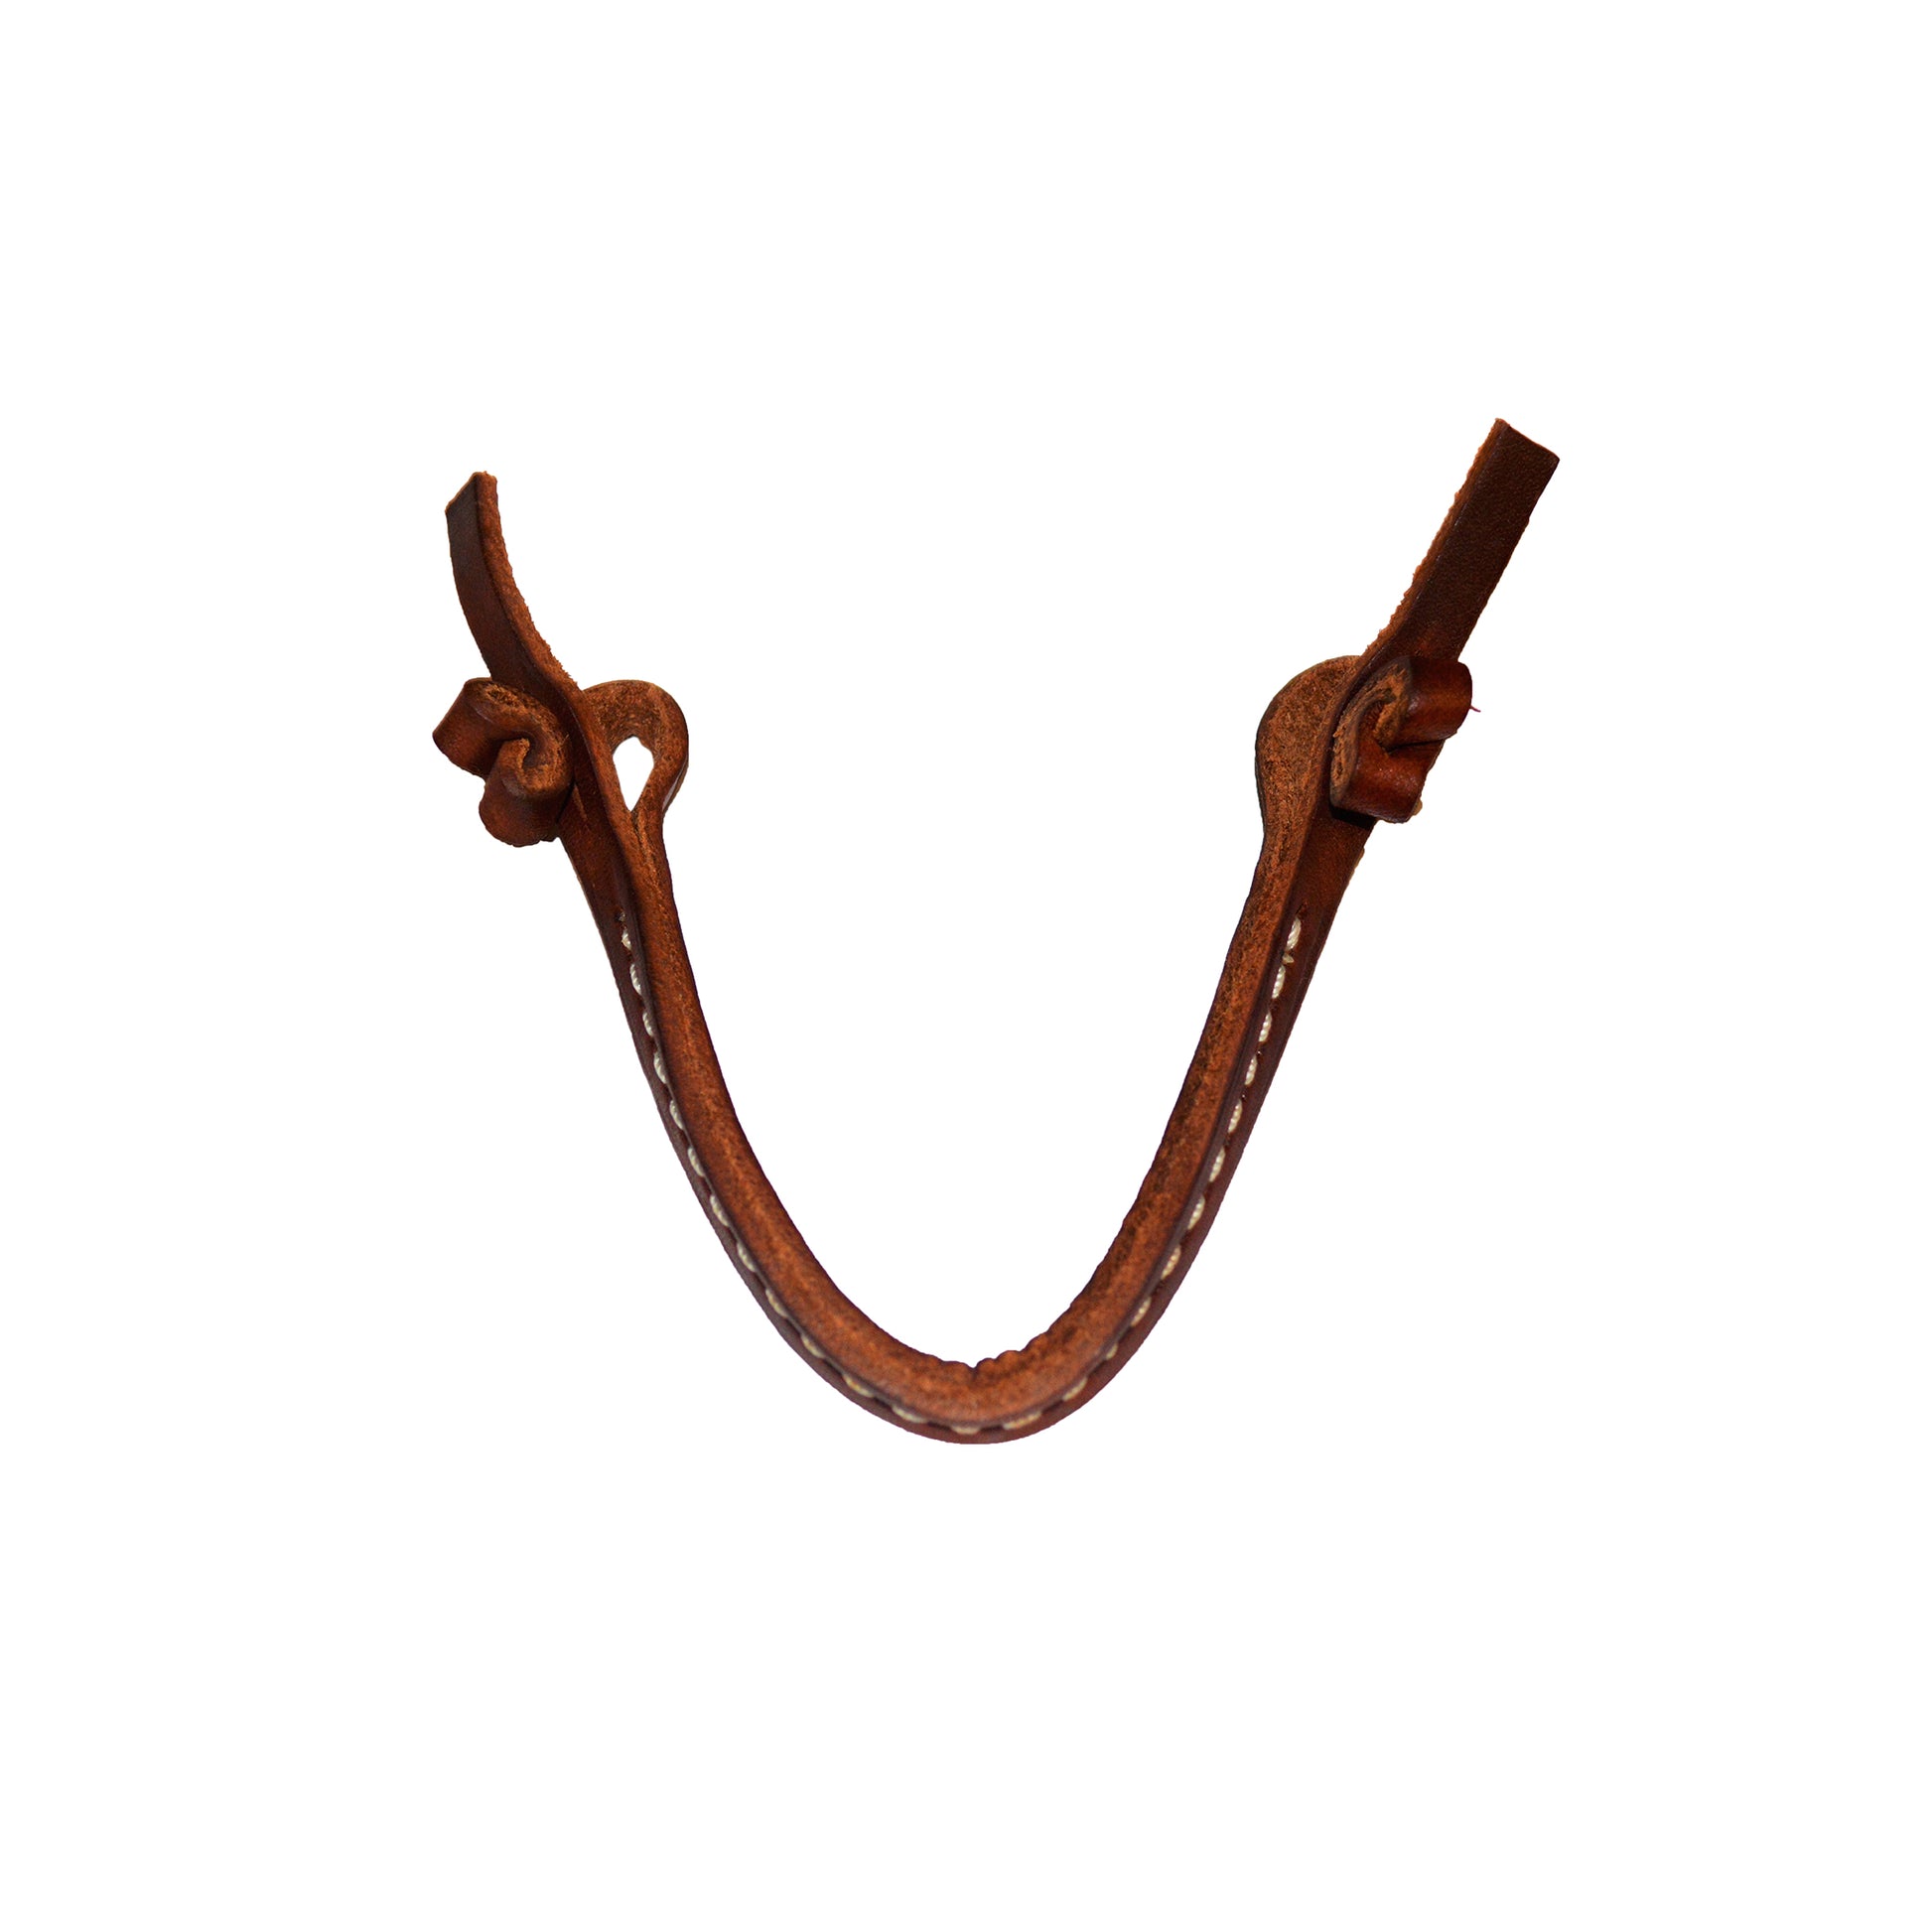 Tie down holder harness leather.